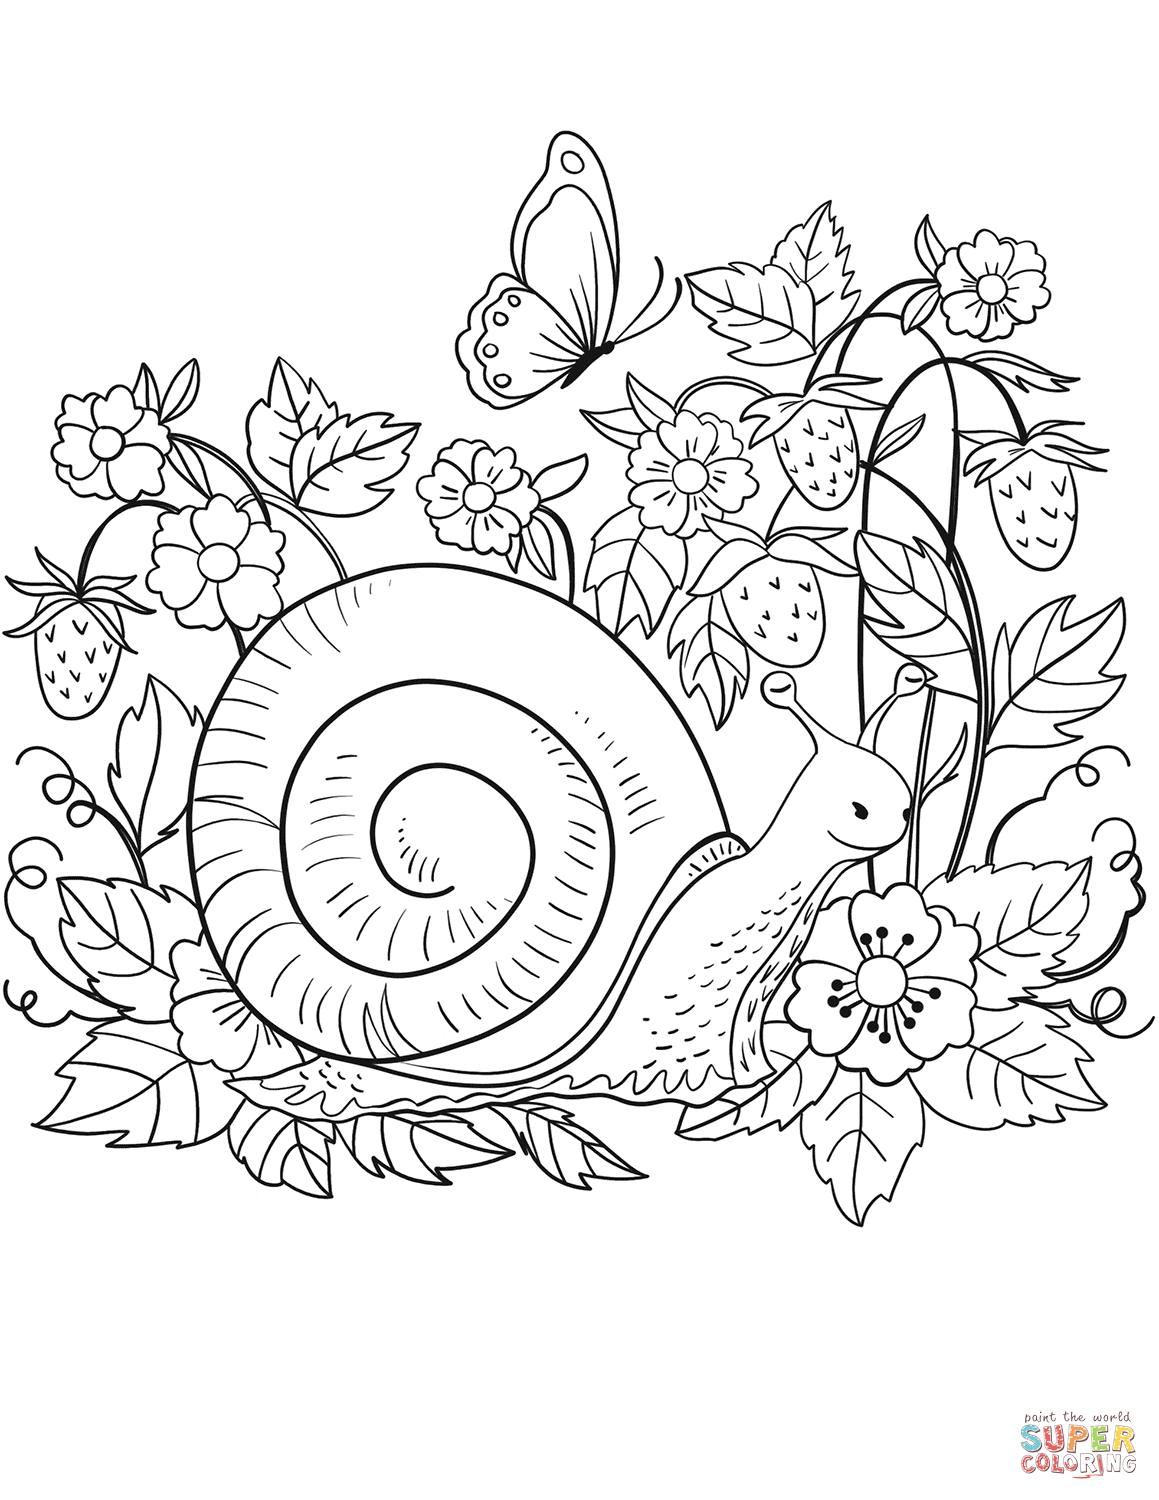 Snail coloring page free printable coloring pages coloring pages free printable coloring pages animal coloring pages